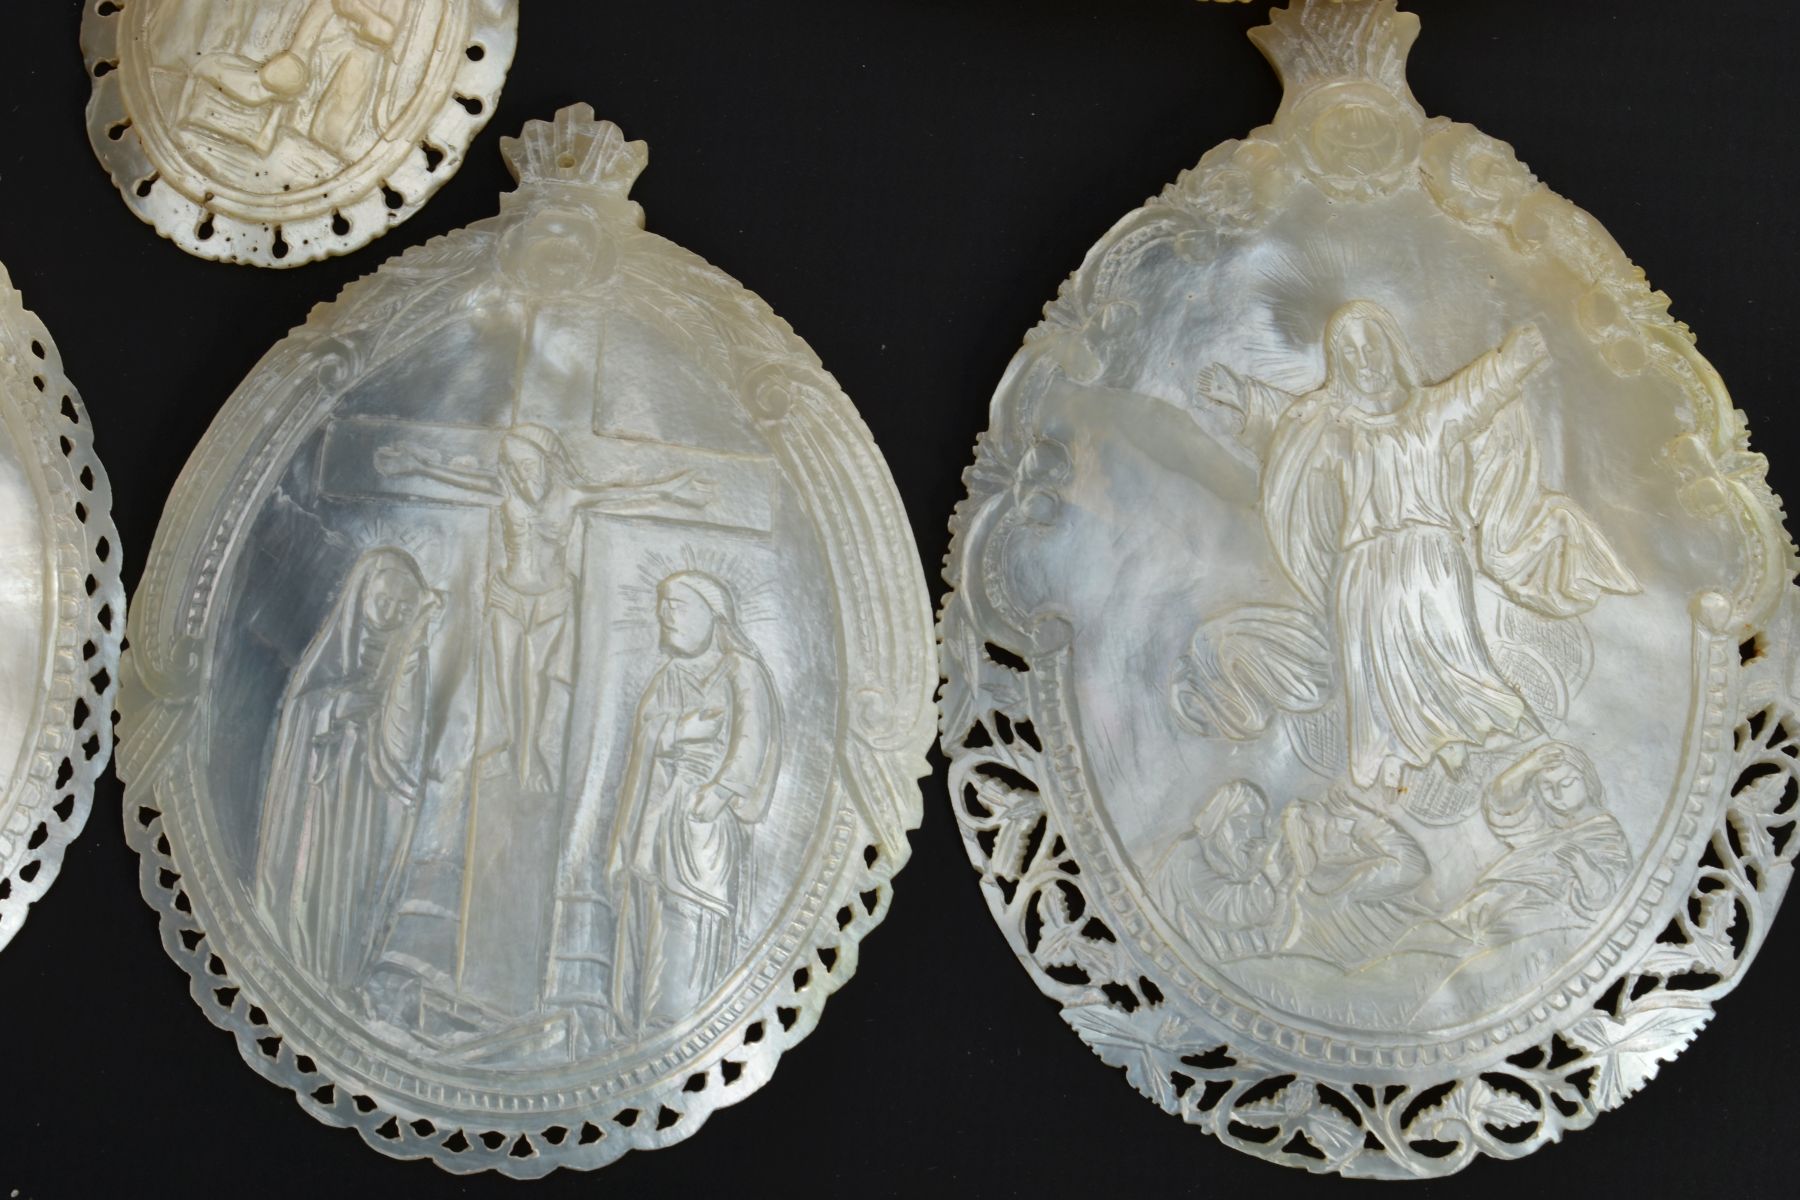 SEVEN MOTHER OF PEARL SHELL CARVINGS OF BIBLICAL SCENES, including the Nativity, the crucifixion and - Image 16 of 17